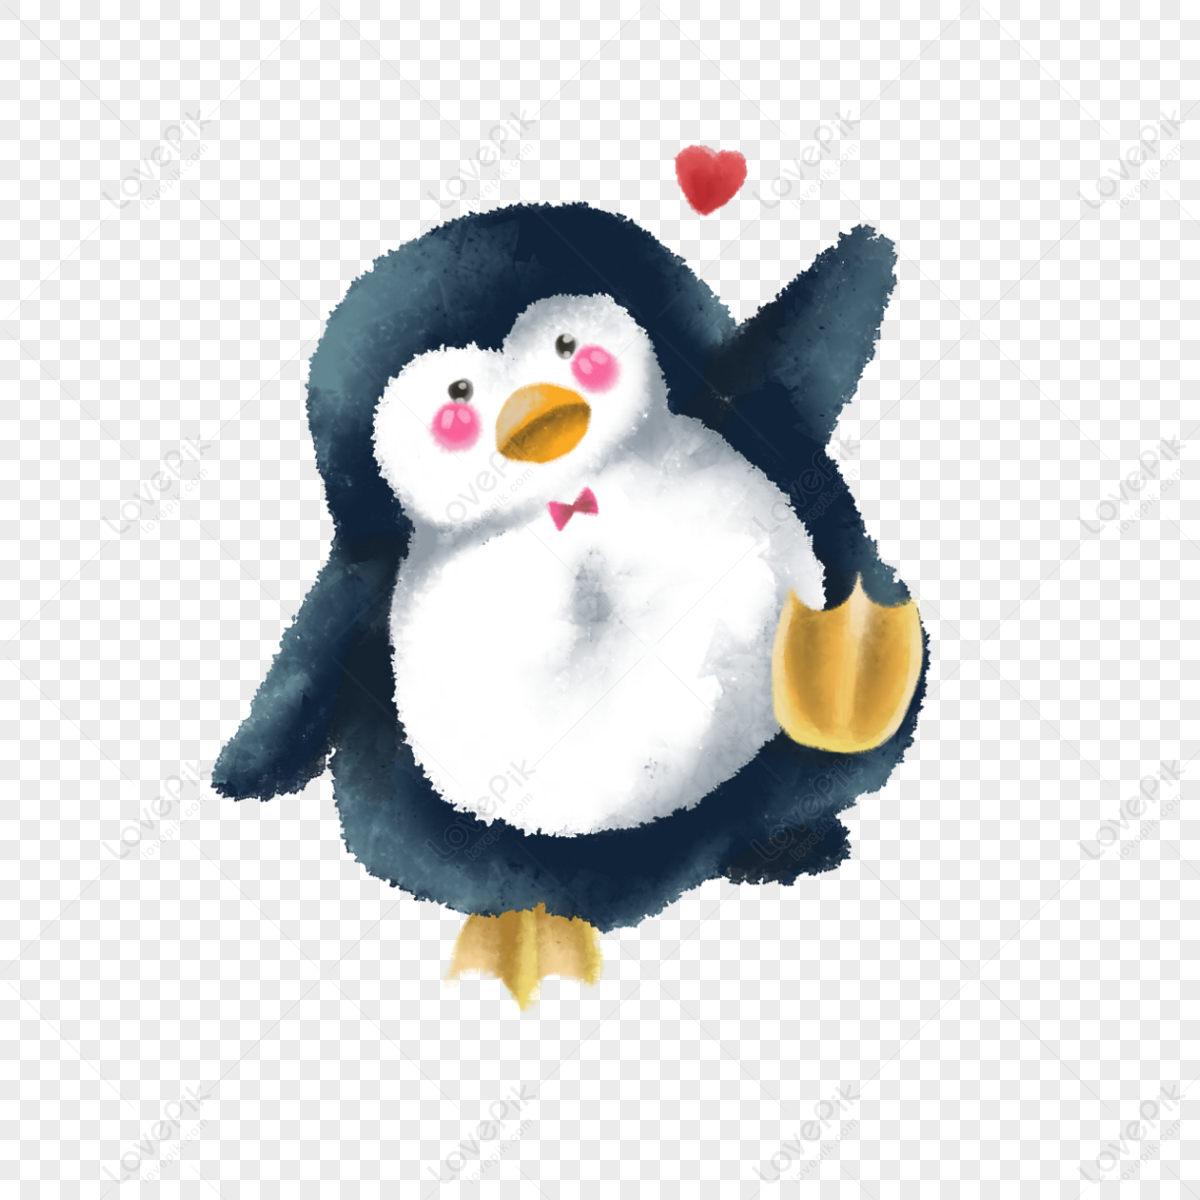 Small penguin watercolor vacuum animal,circle,relationship,banner png transparent background